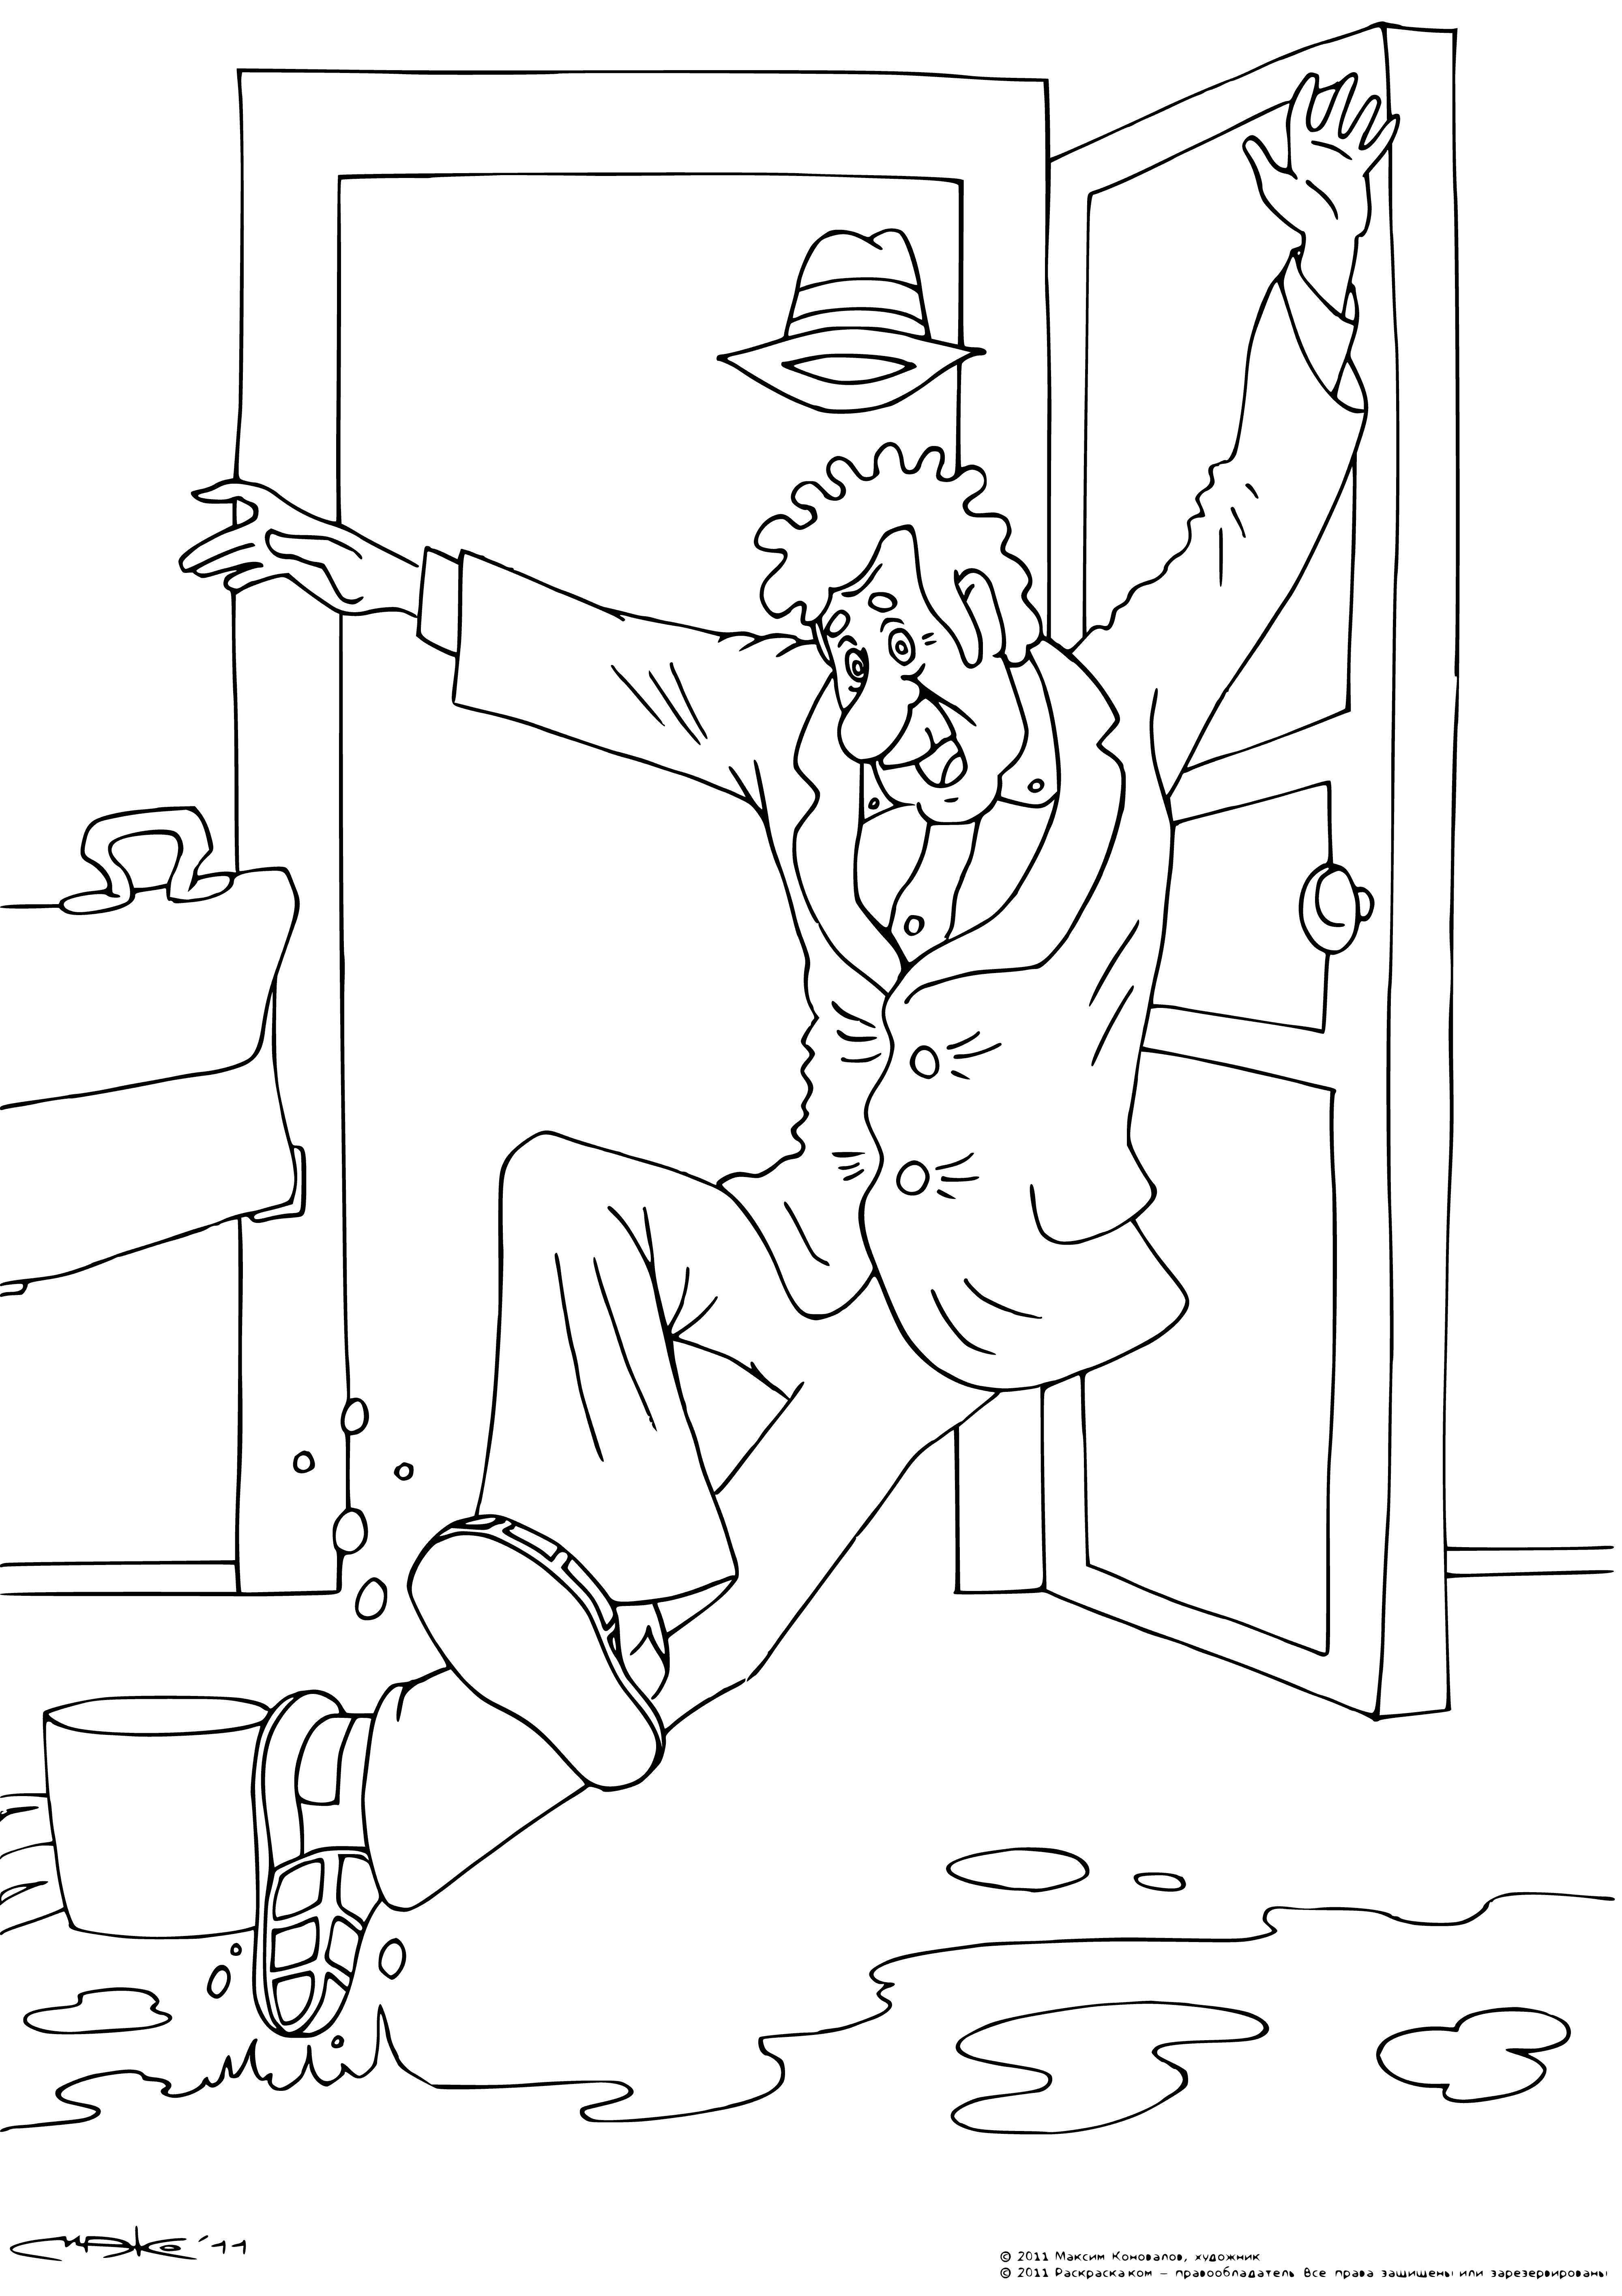 coloring page: The excited Bobik is visiting his grandpa and wagging his tail in joy.